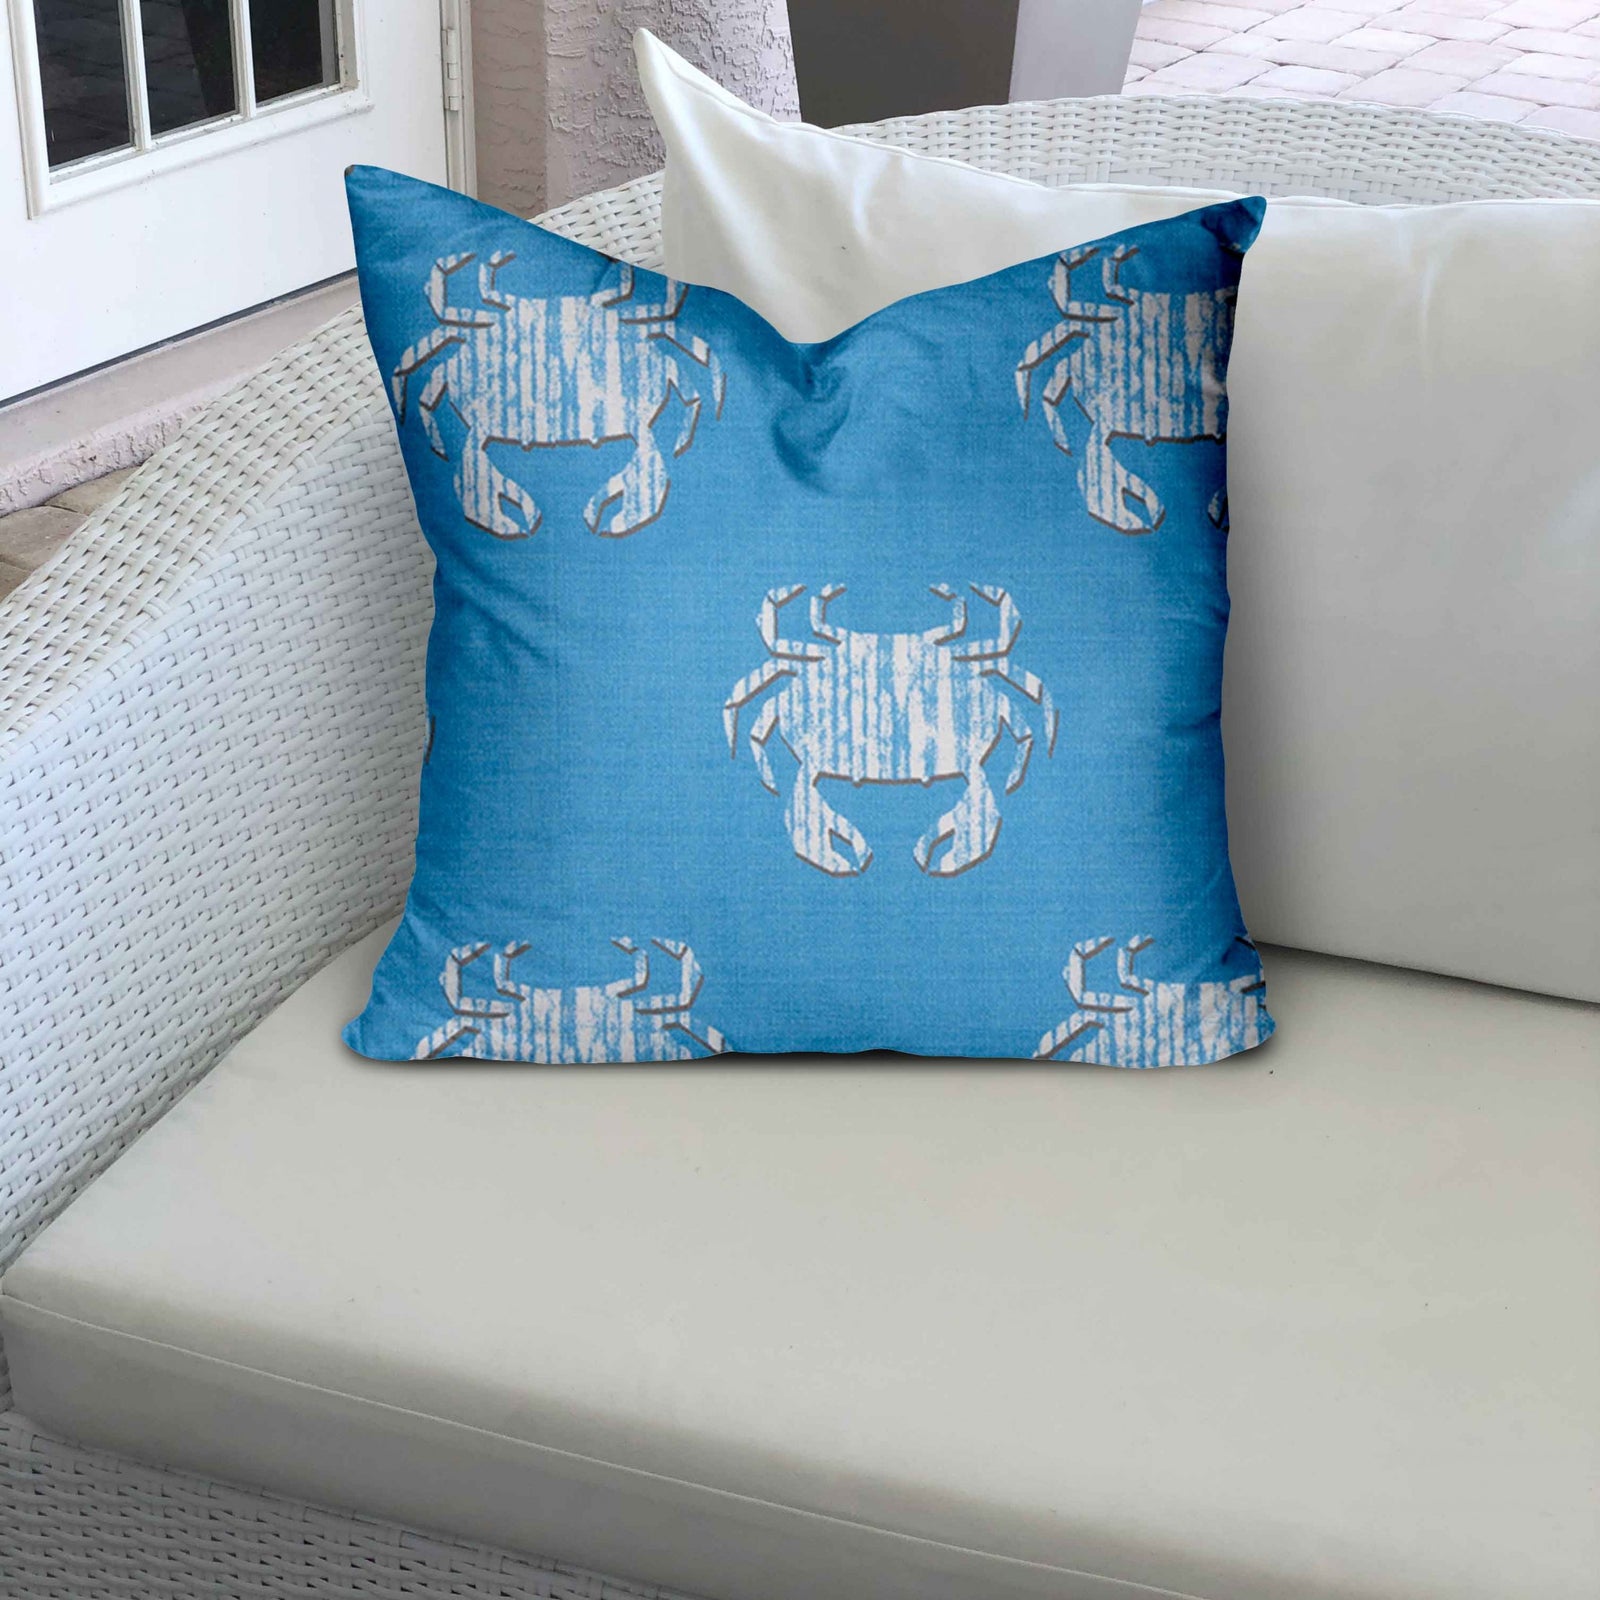 12" X 12" Blue And White Crab Zippered Coastal Throw Indoor Outdoor Pillow Cover